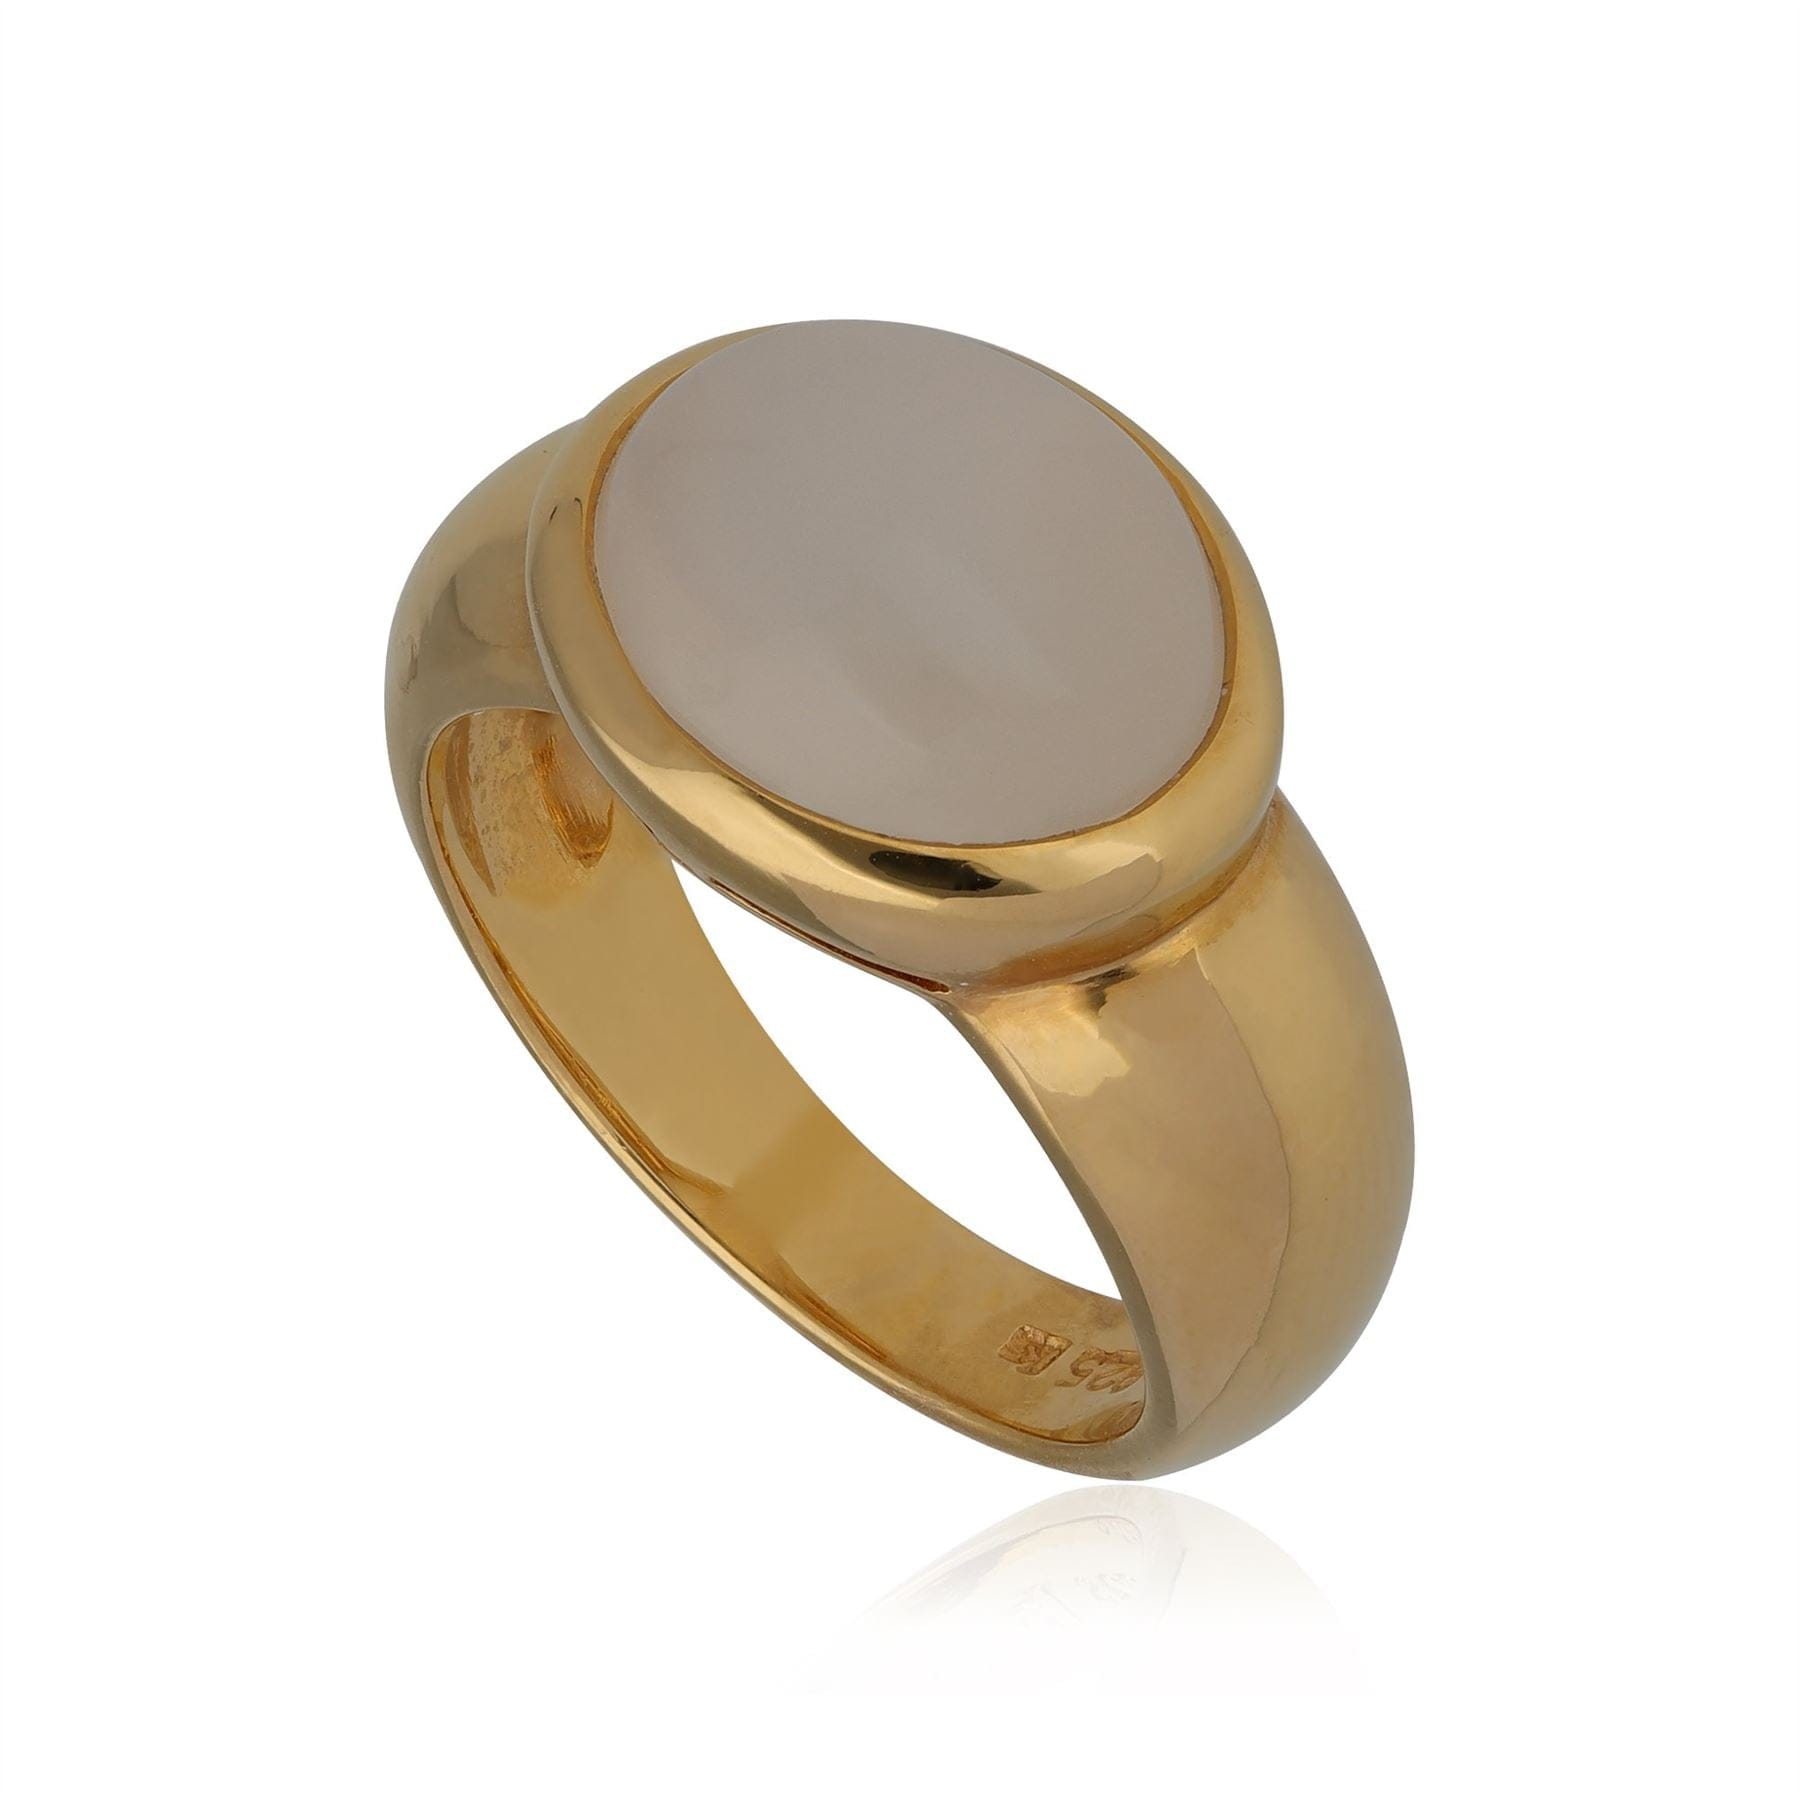 T0826R901317 Kosmos Moonstone Cocktail Ring in Gold Plated Sterling Silver 1